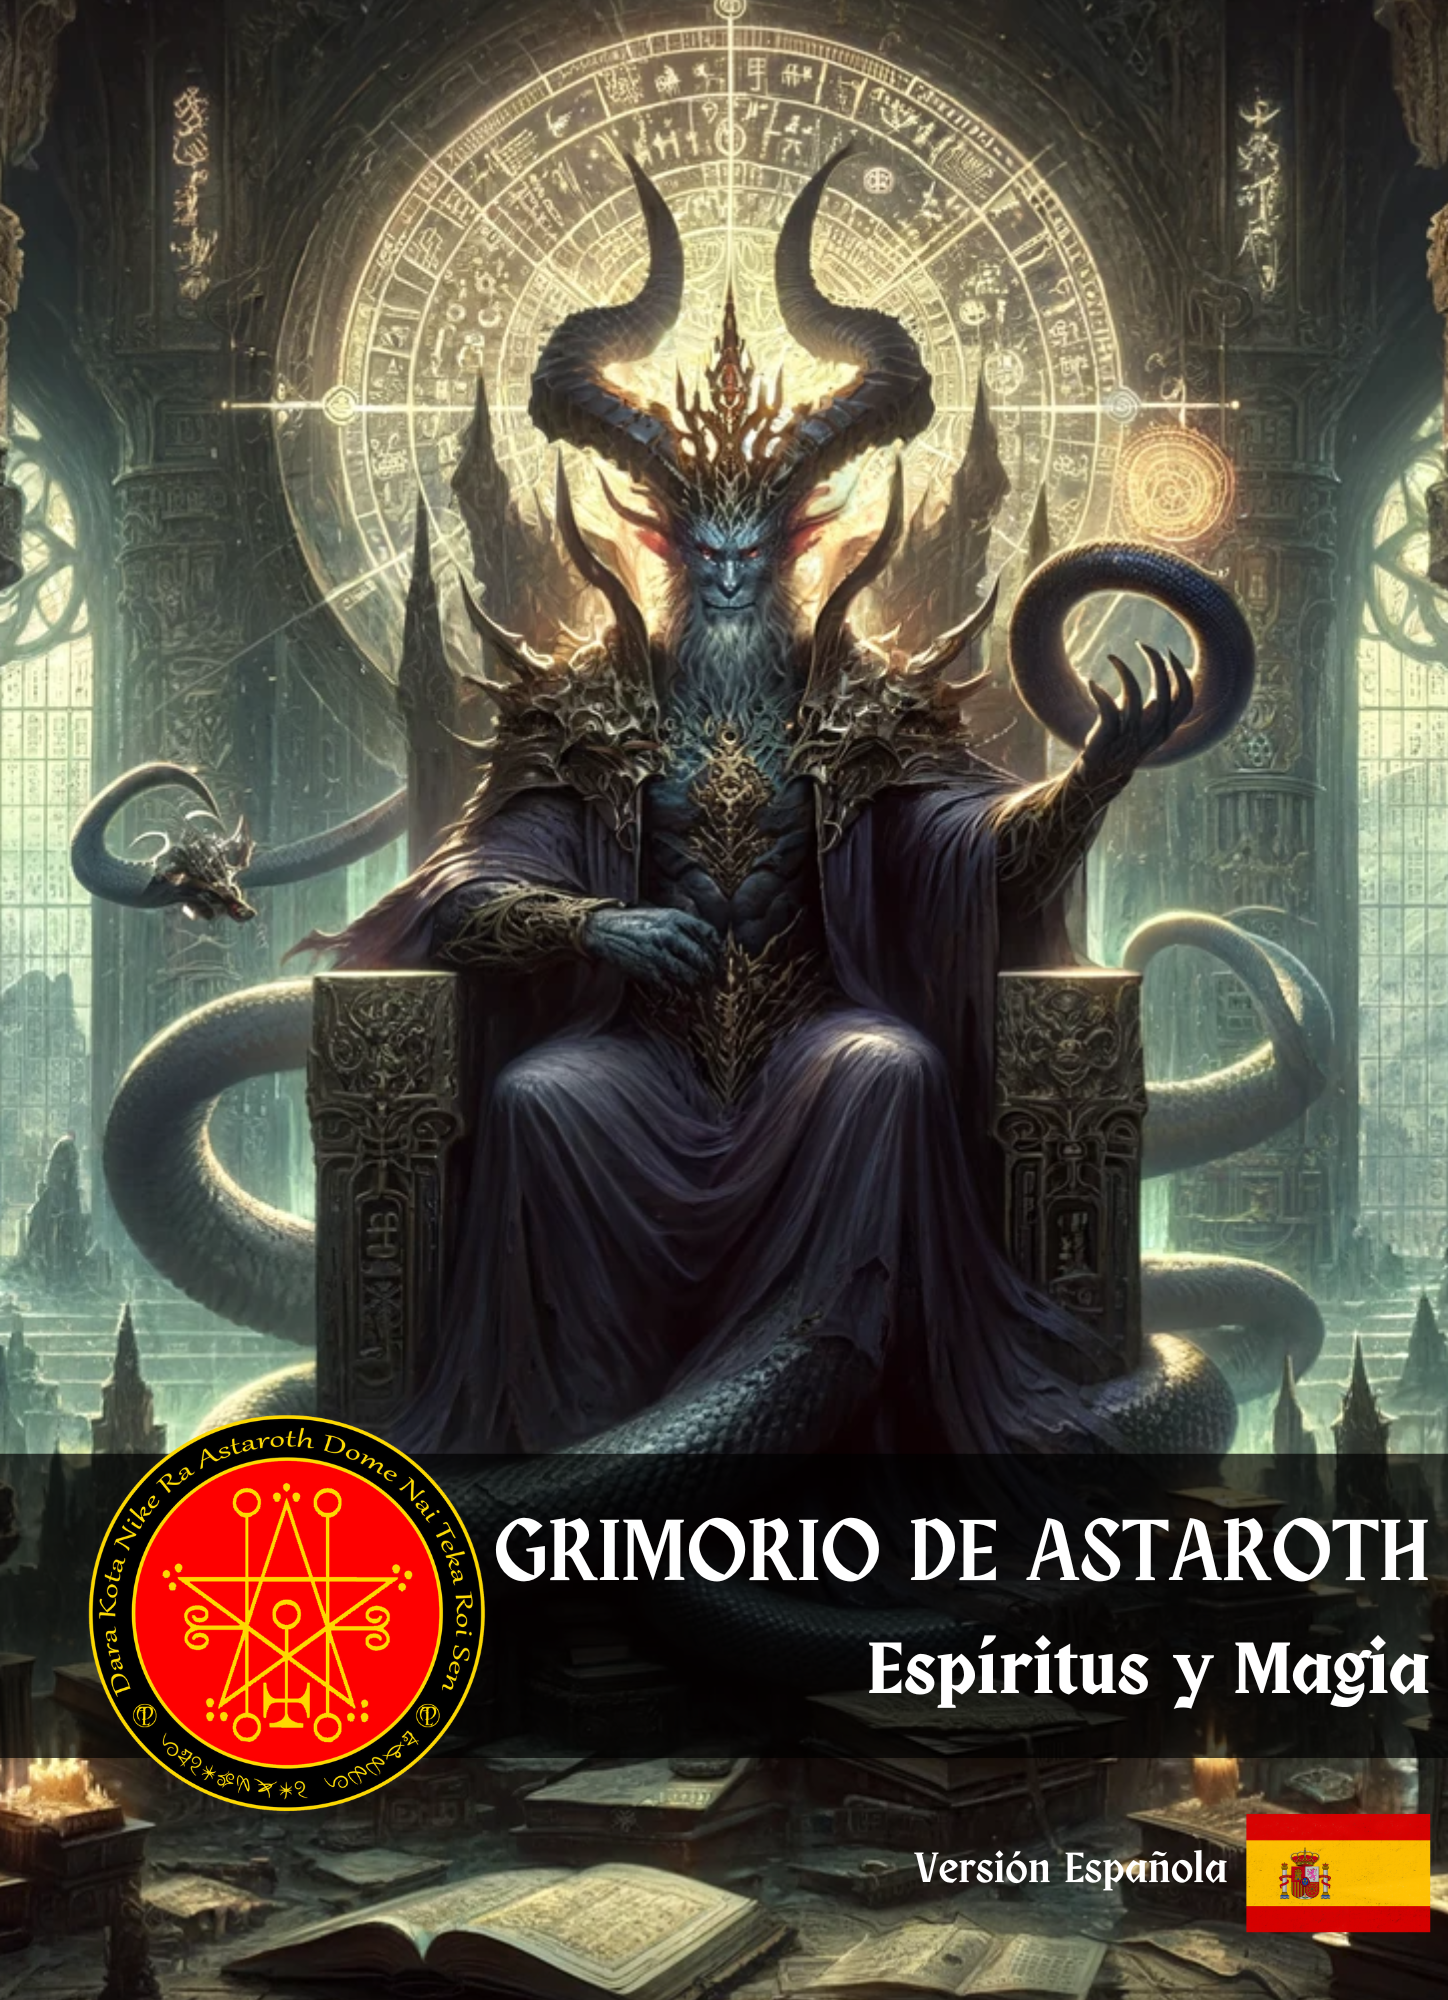 Grimoire of ASTAROTH Spells & Rituals for friendship and love , revealing hidden secrets and to Empower Yourself - Abraxas Amulets ® Magic ♾️ Talismans ♾️ Initiations